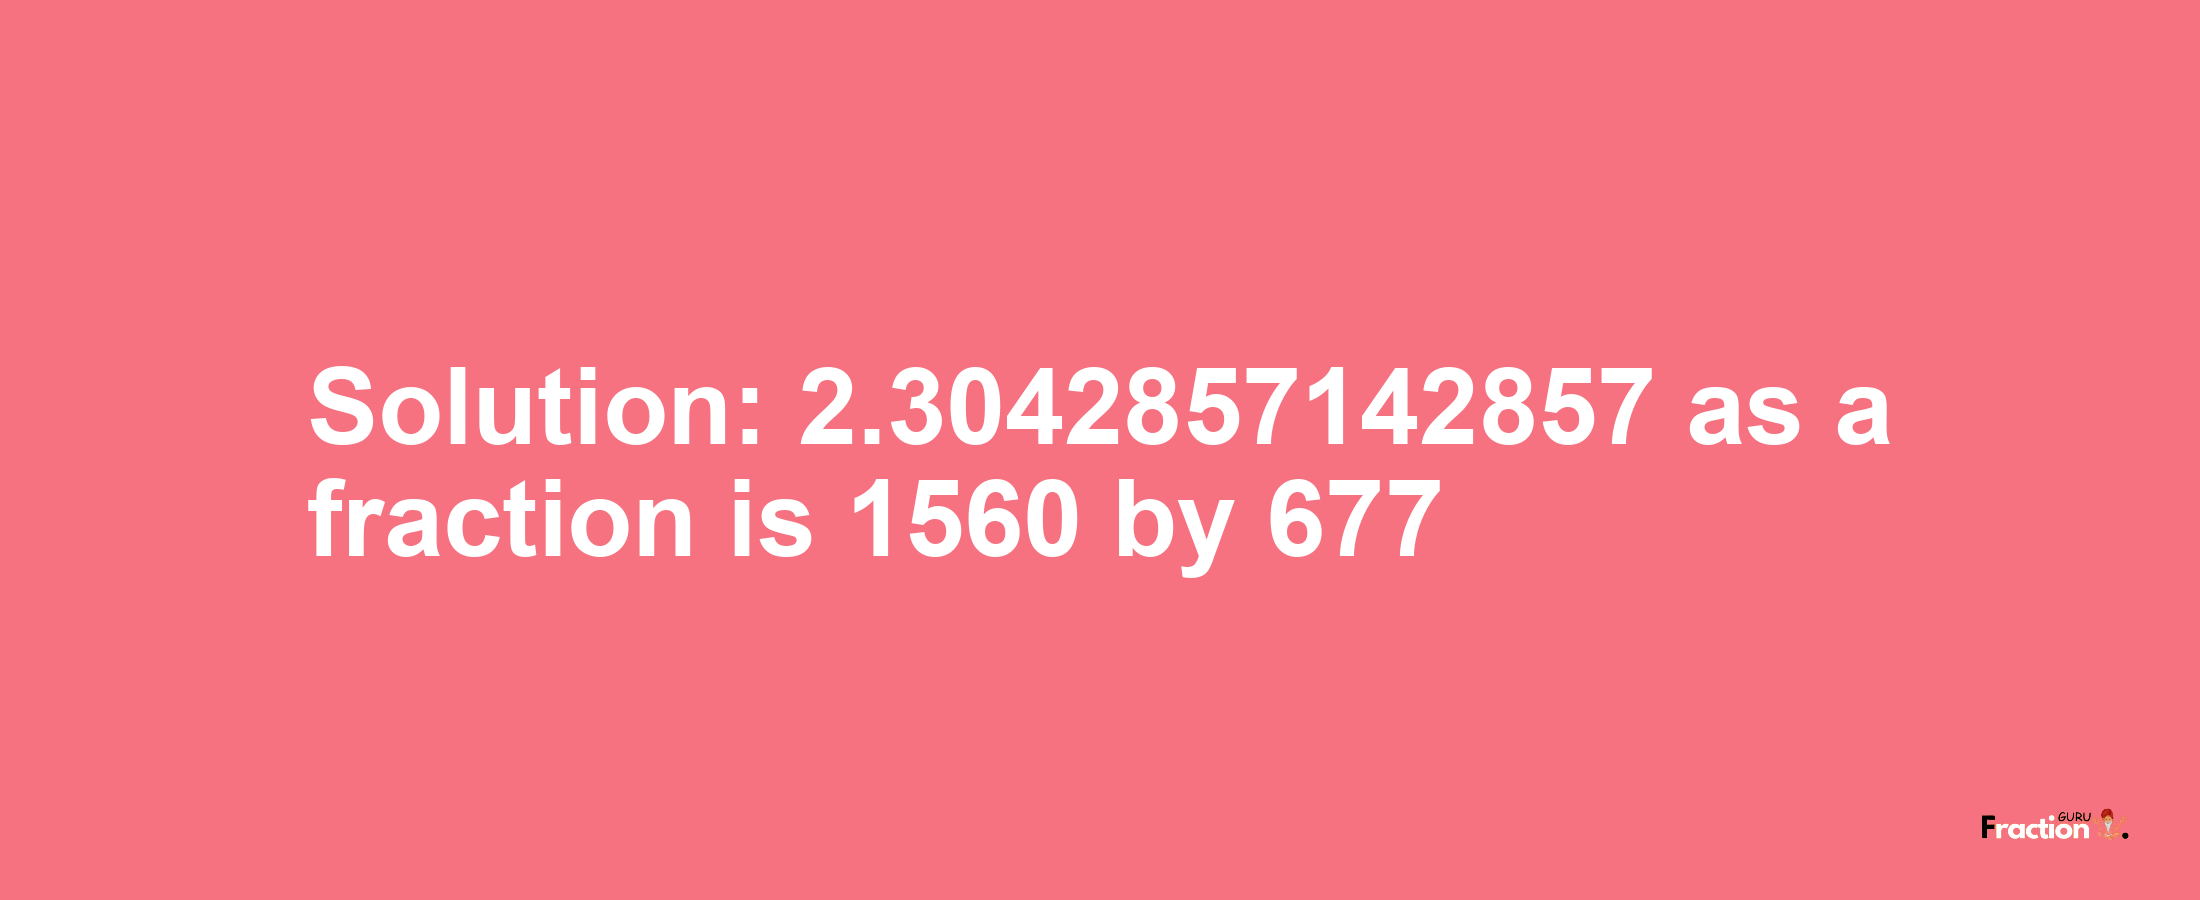 Solution:2.3042857142857 as a fraction is 1560/677